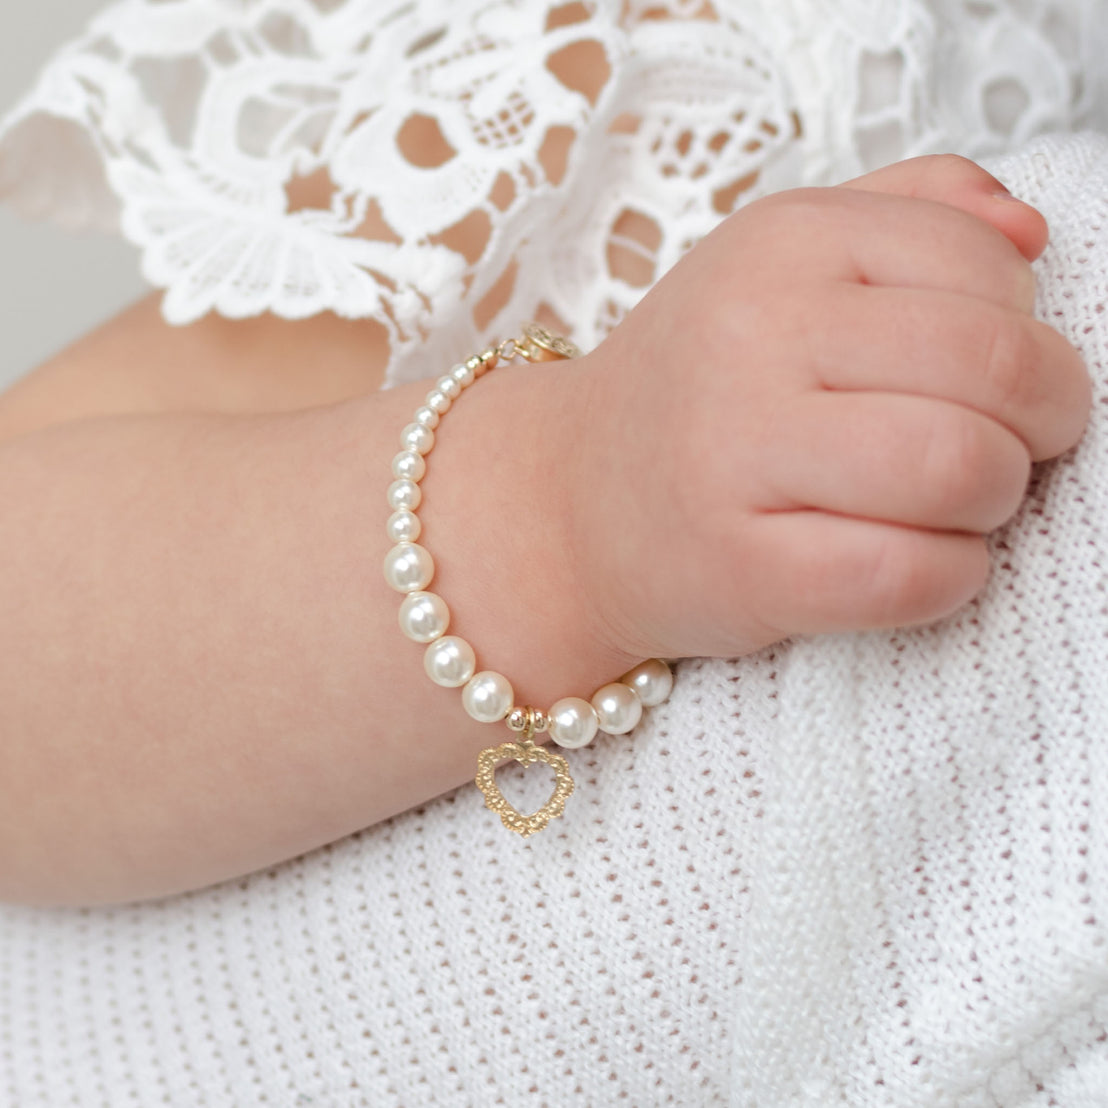 Pearl bracelet on baby with gold heart